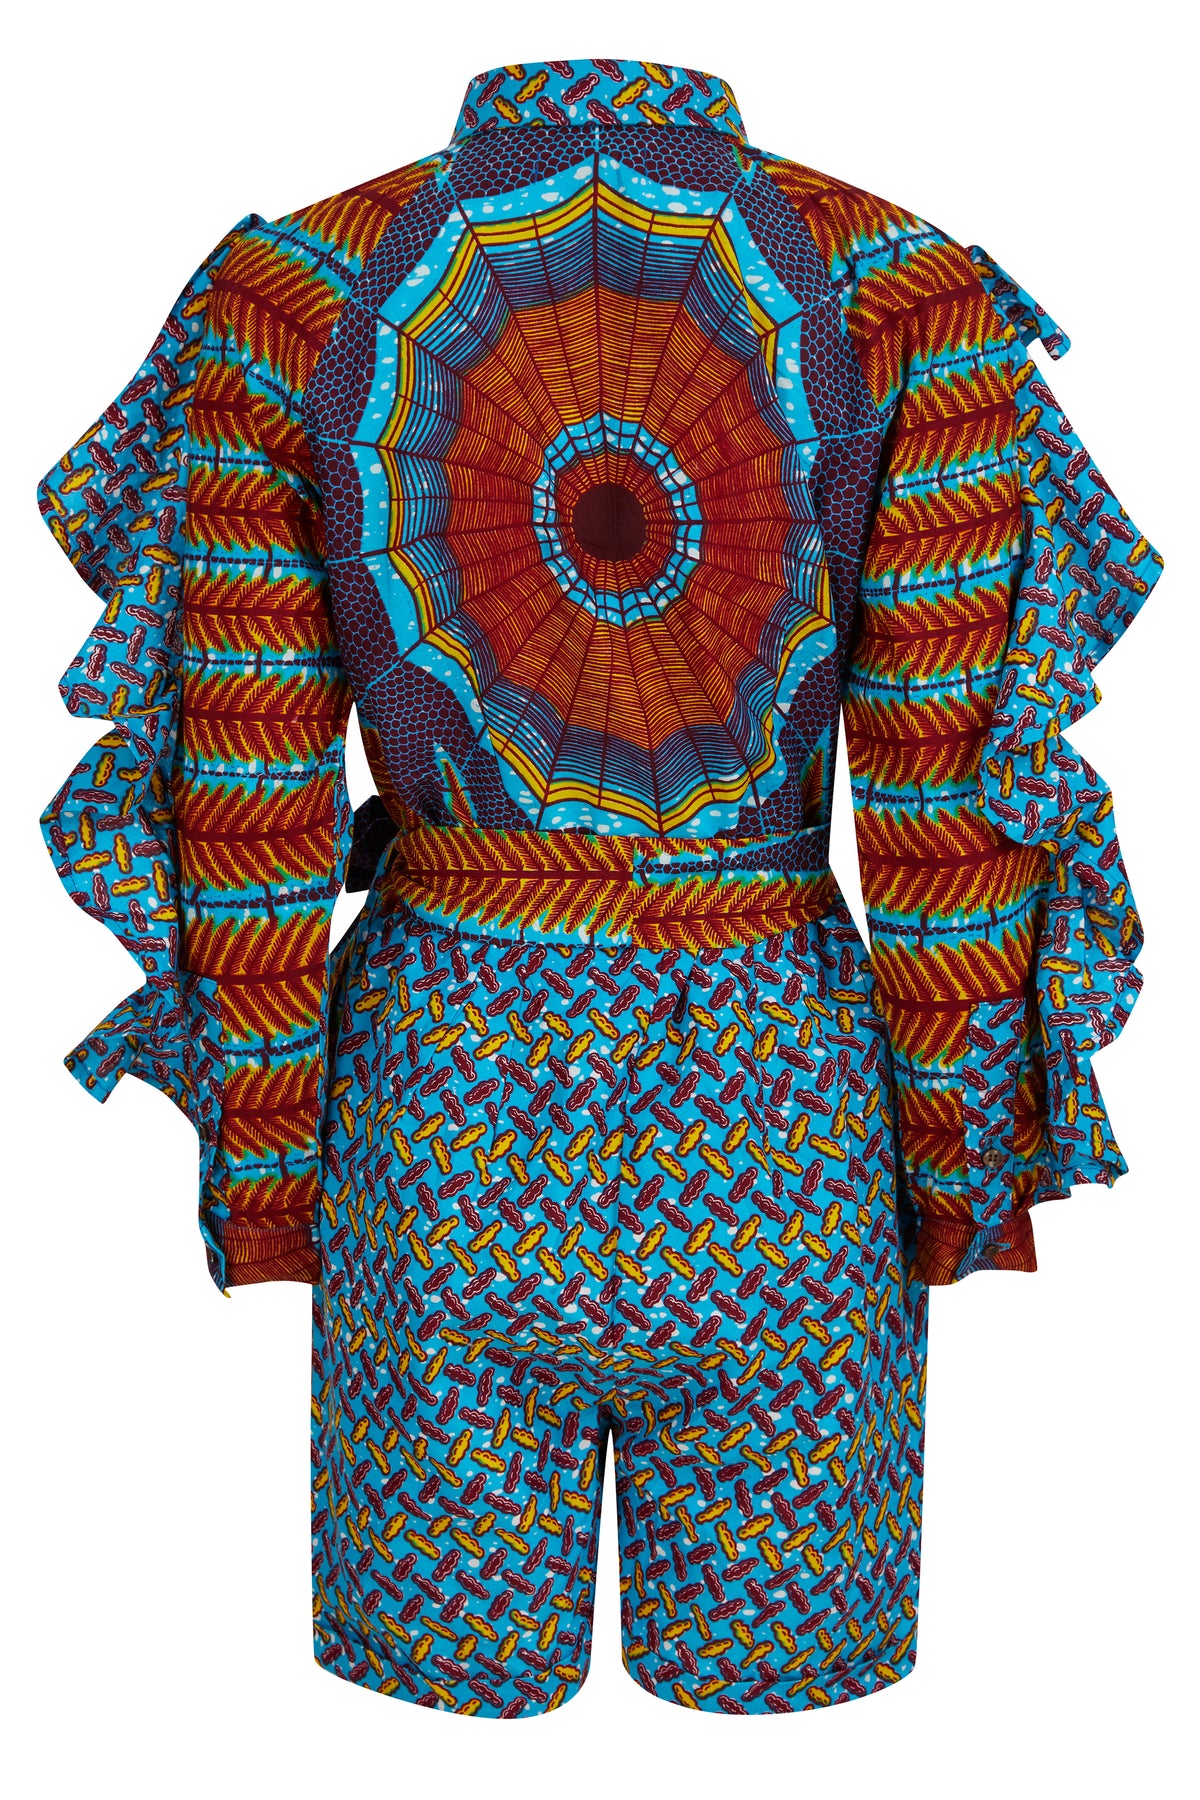 Linda African Mixed Print Playsuit - OHEMA OHENE AFRICAN INSPIRED FASHION